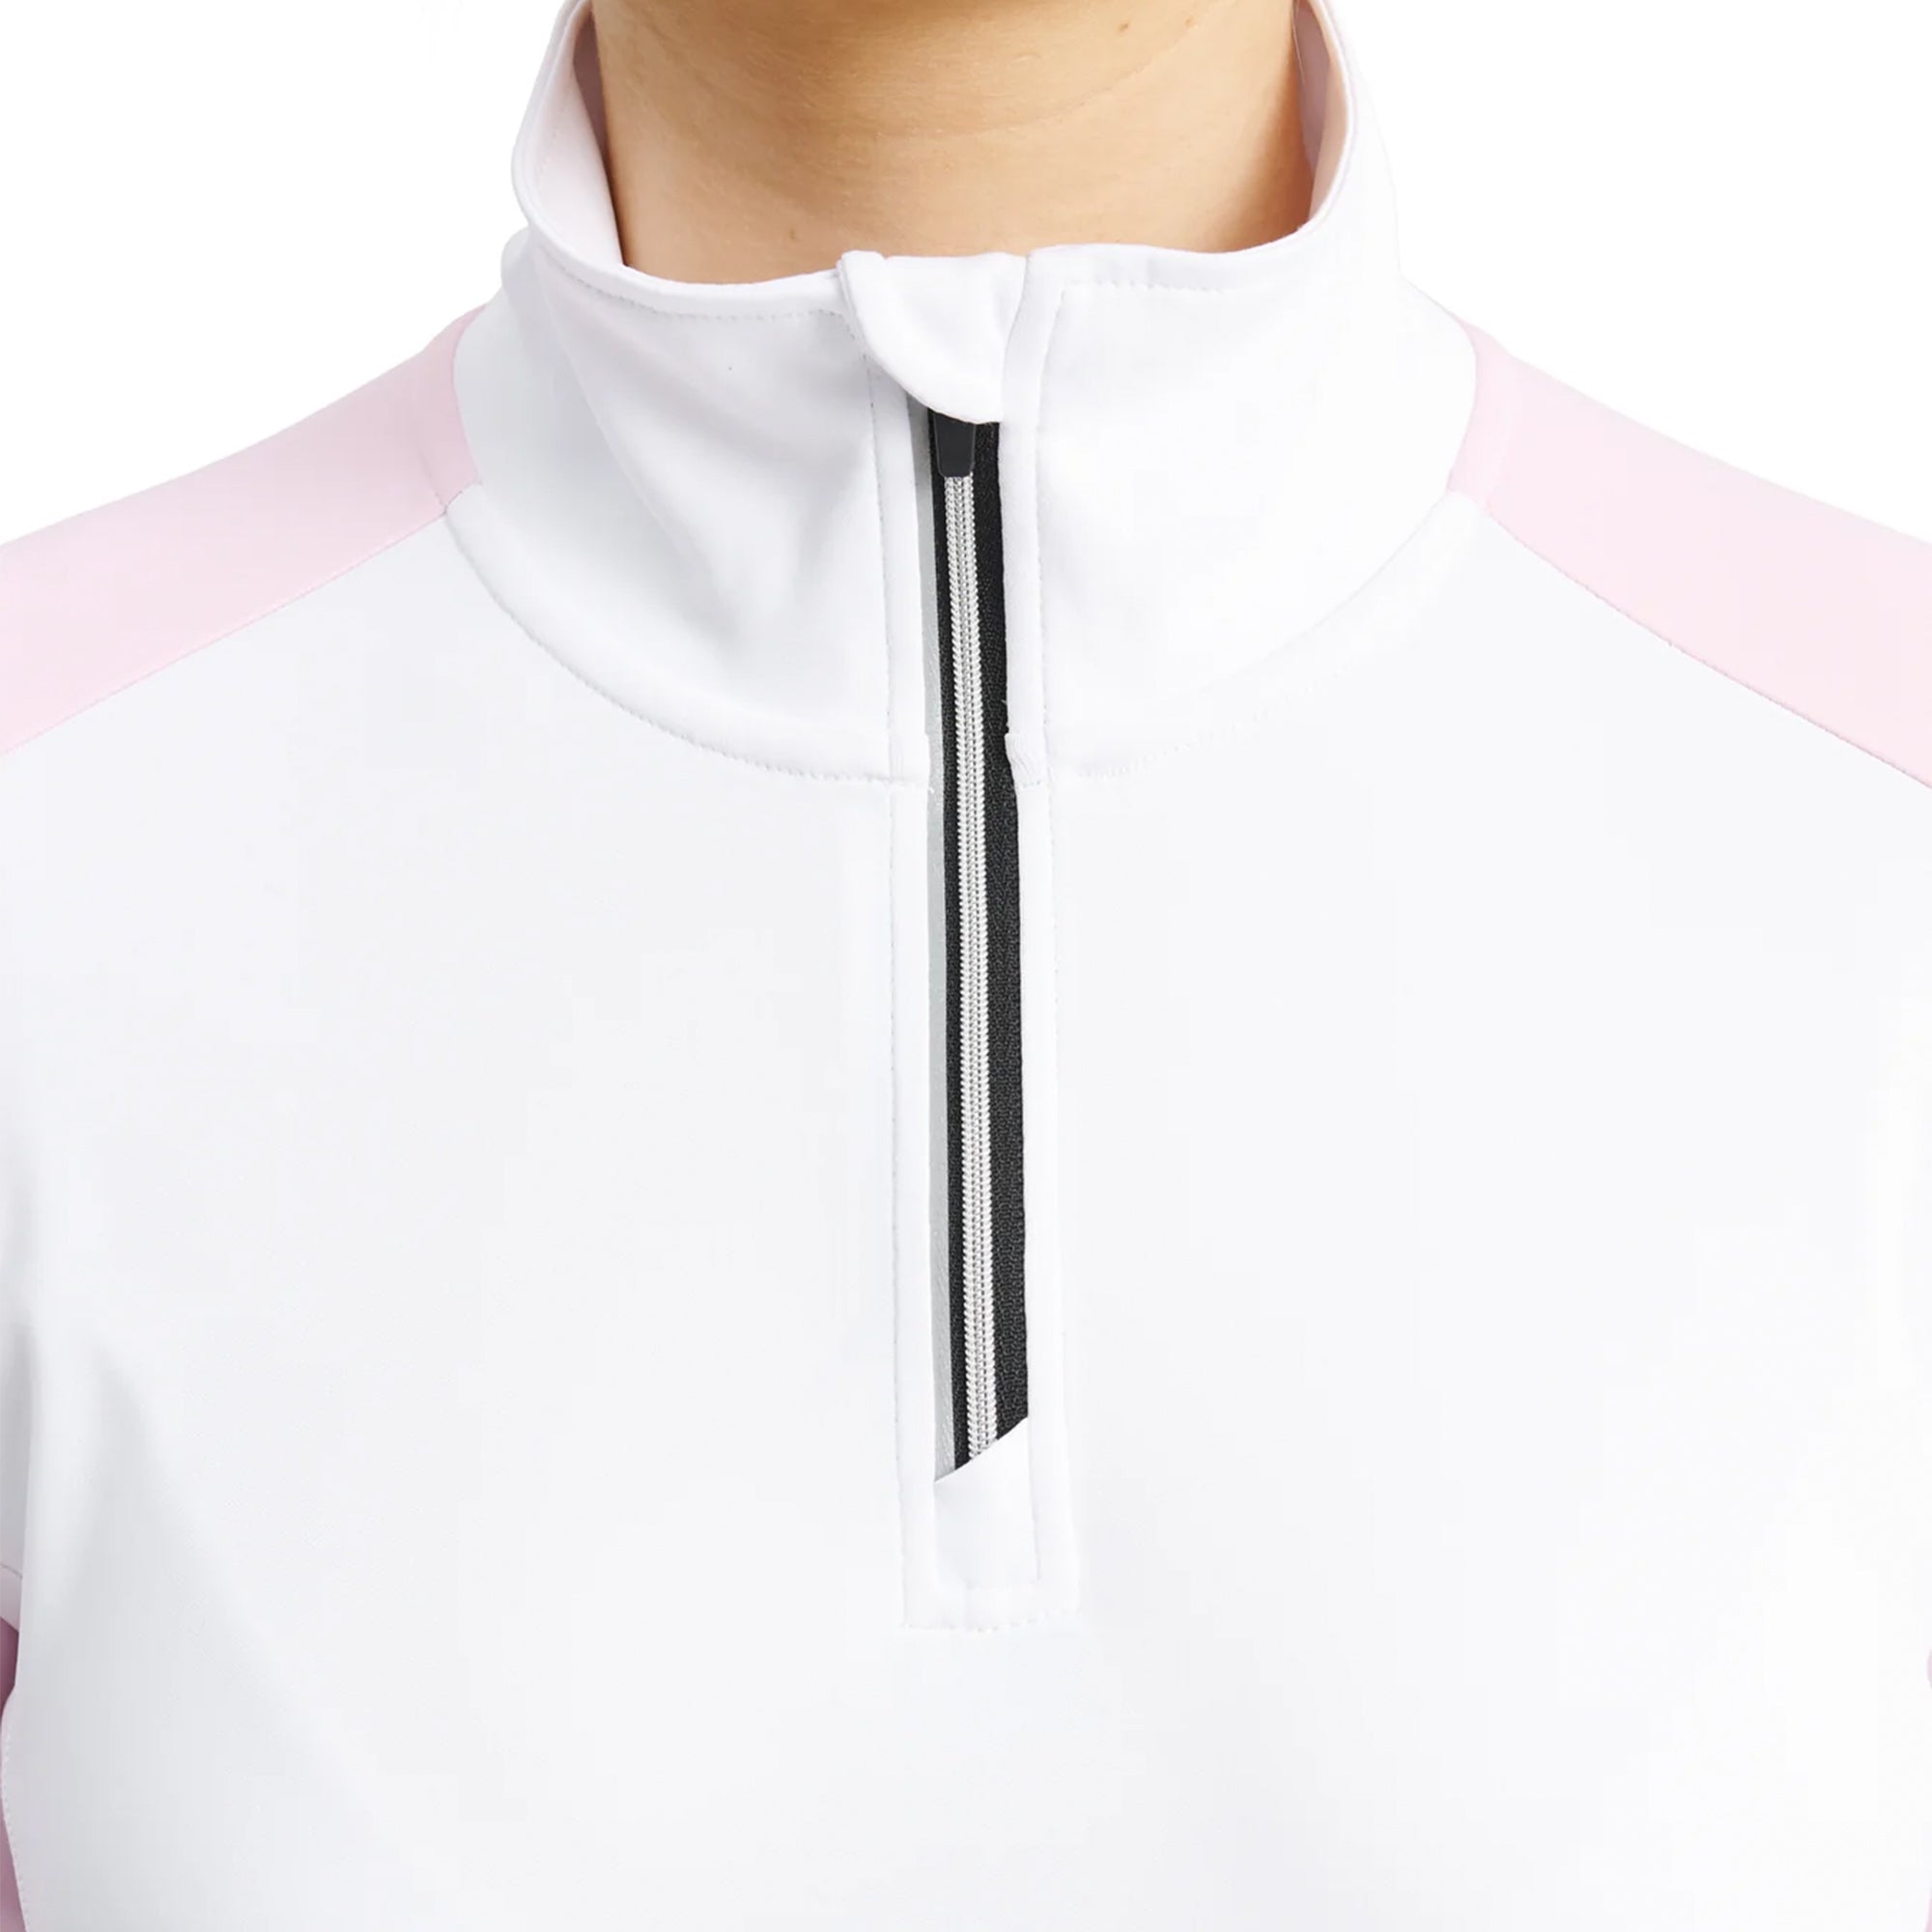 Abacus Cypress UV Long Sleeve Pullover